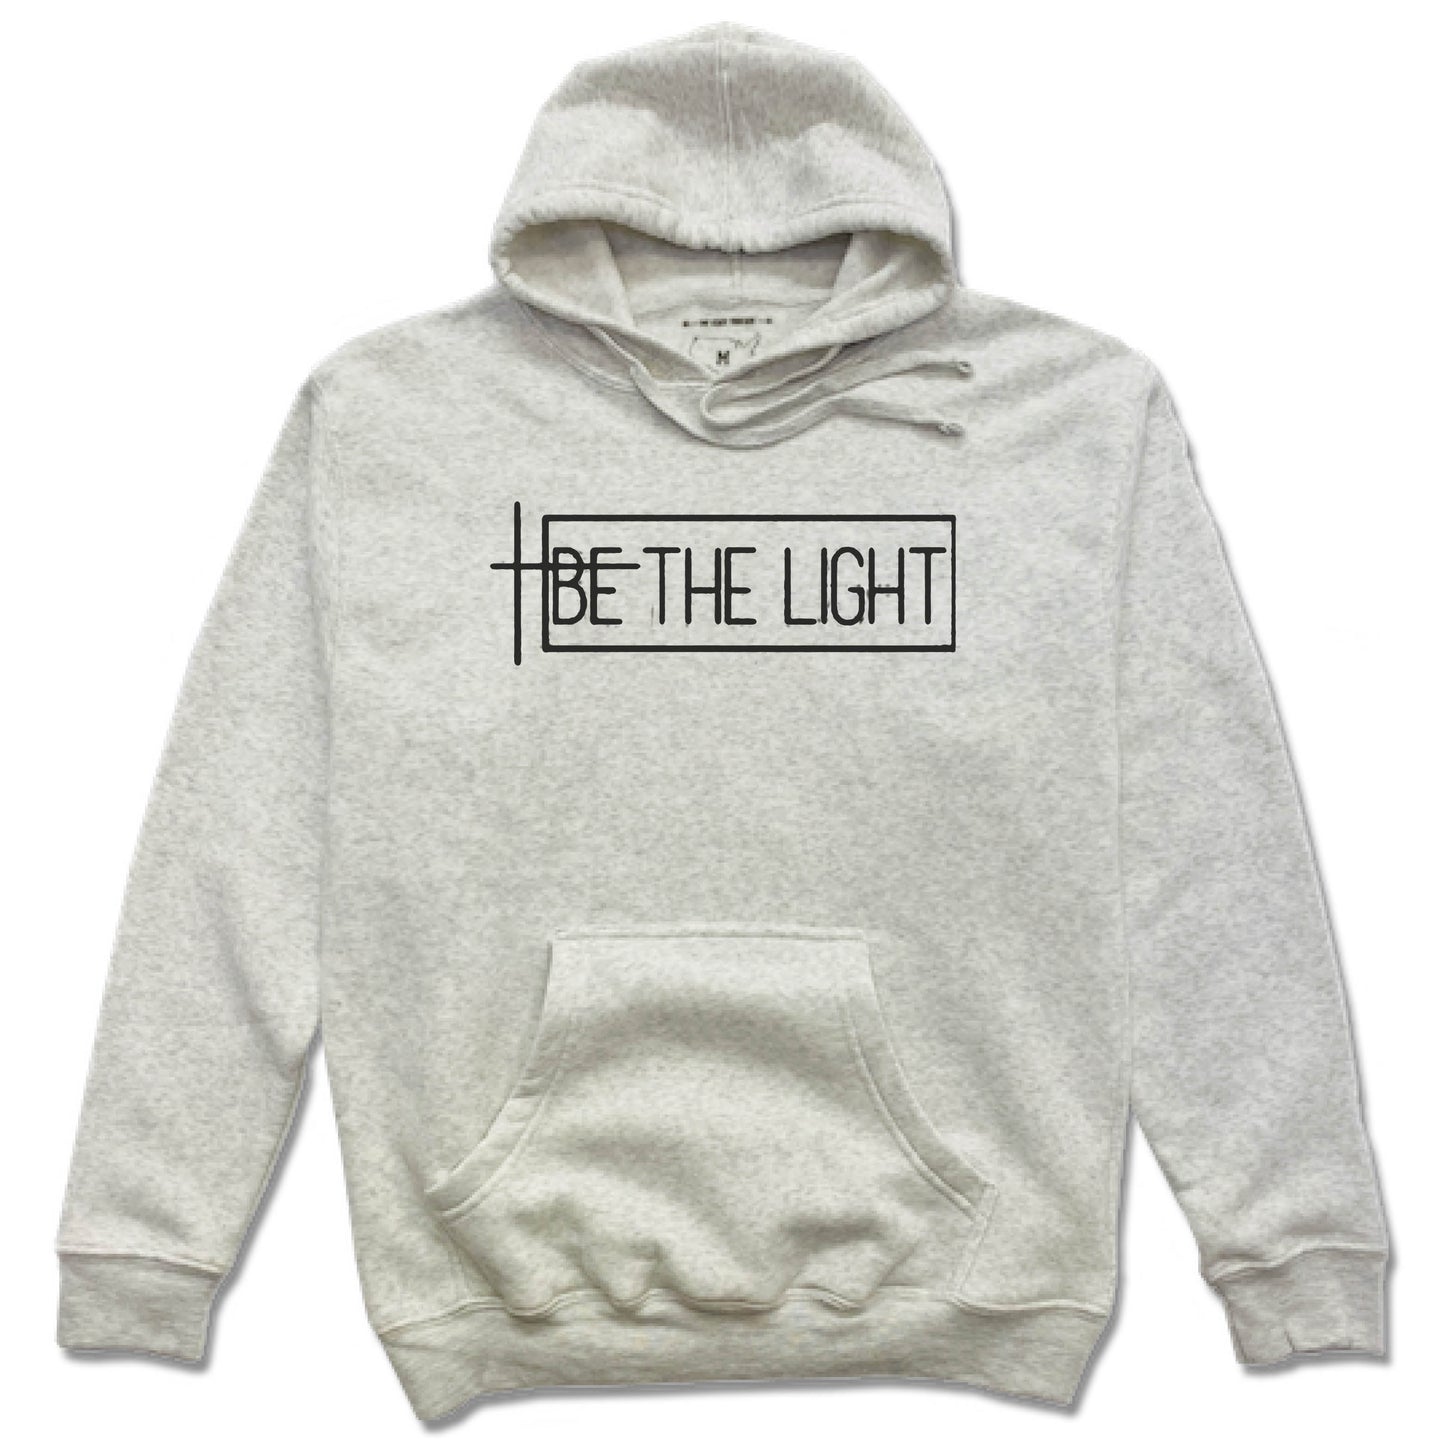 THE SISTER'S CLOSET | HOODIE | BE THE LIGHT